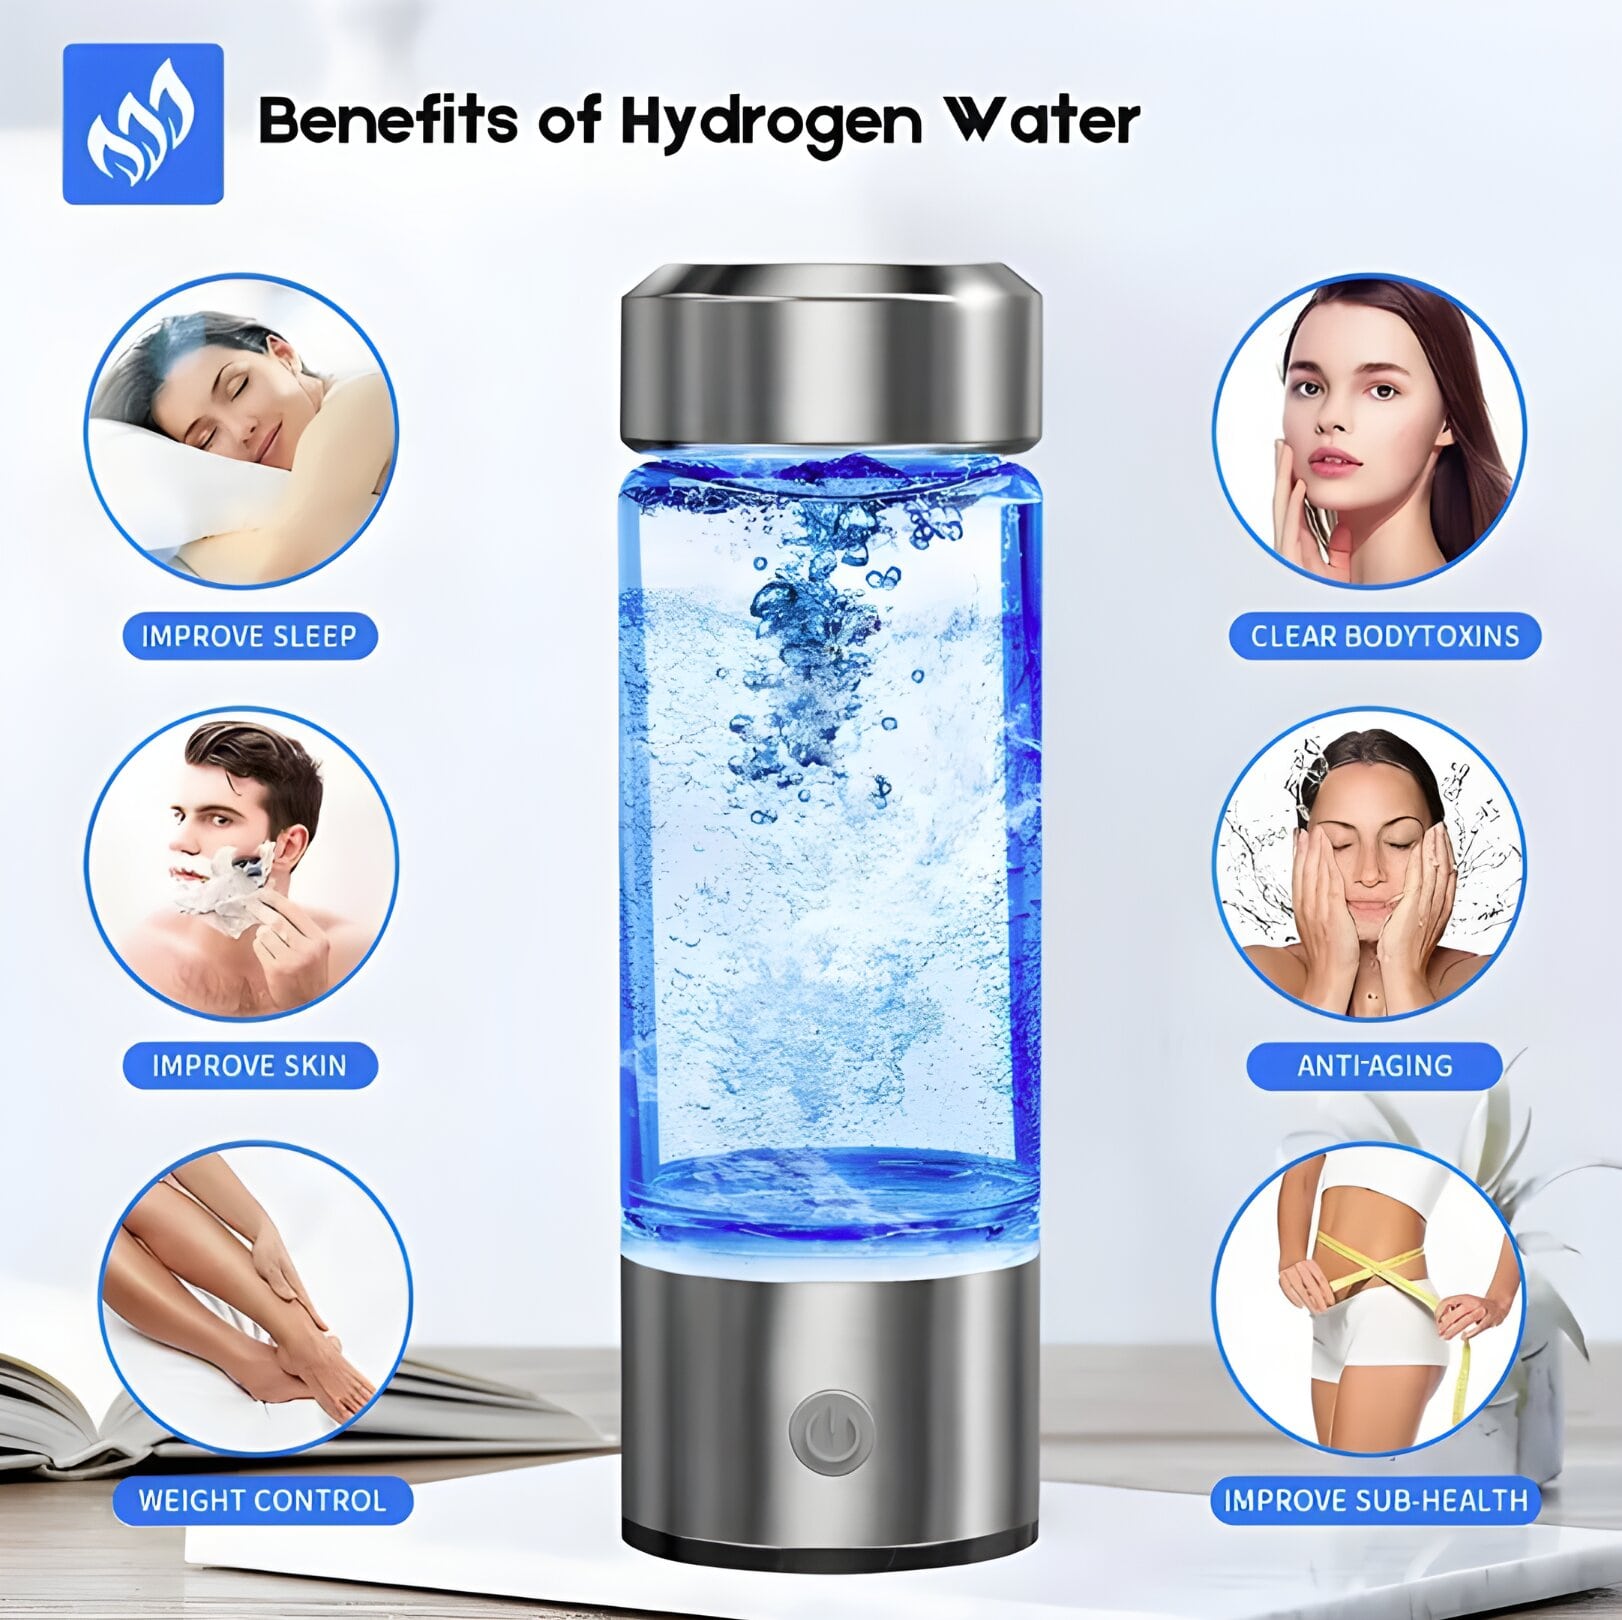 Benefits of hydrogen water with a central image of a bubbling hydrogen water bottle surrounded by icons depicting improved sleep, clear body toxins, anti-aging, improved skin, weight control, and improved sub-health.